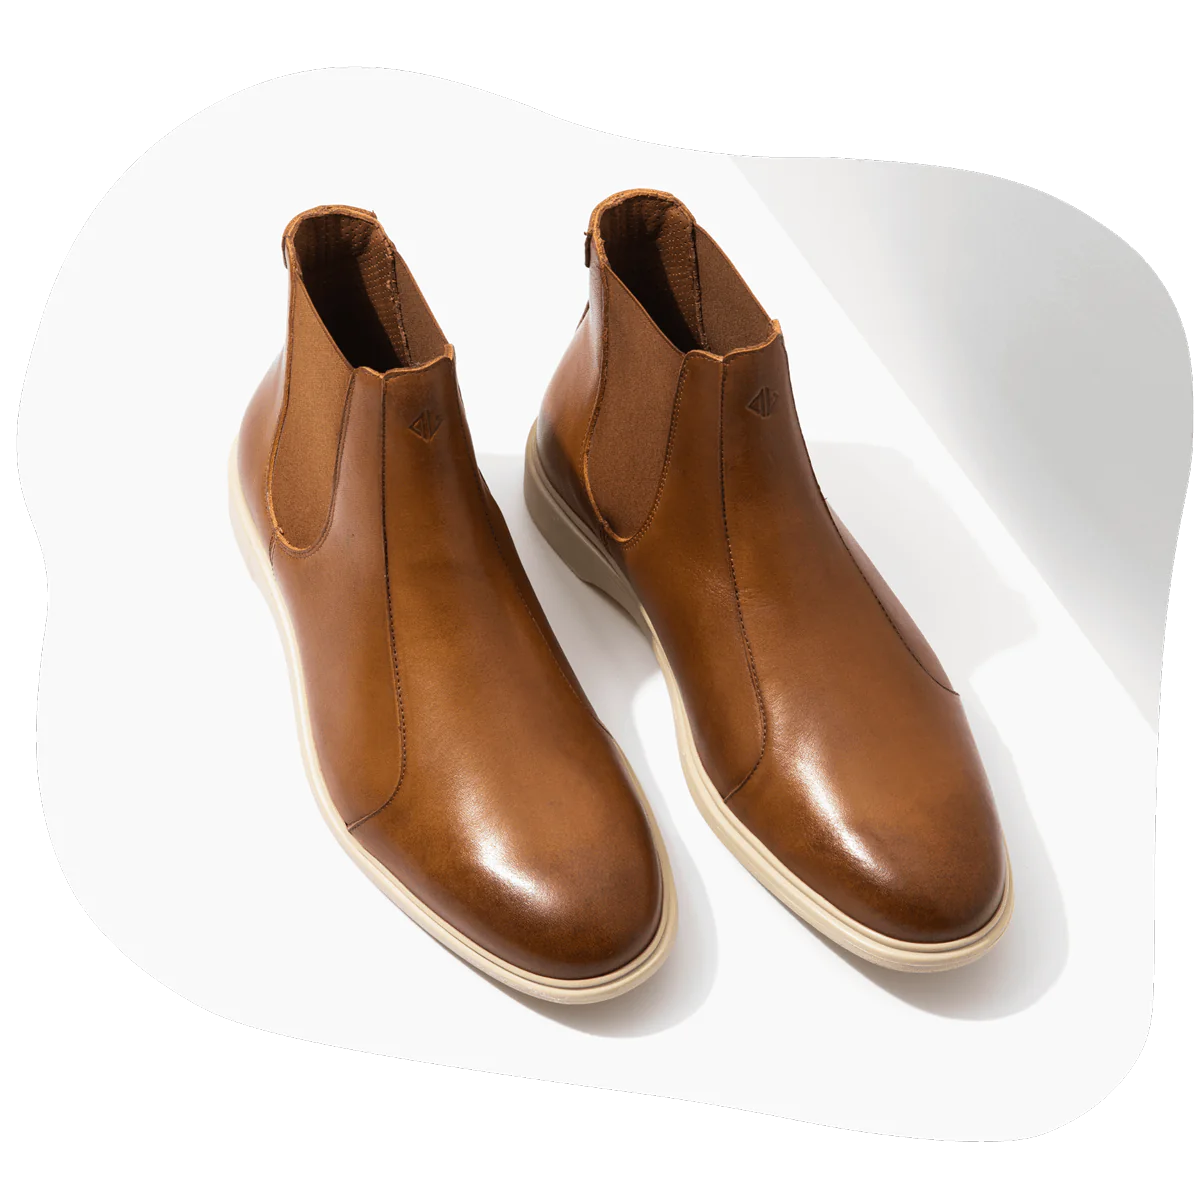 Men's leather Chelsea boots in honey and cream colors